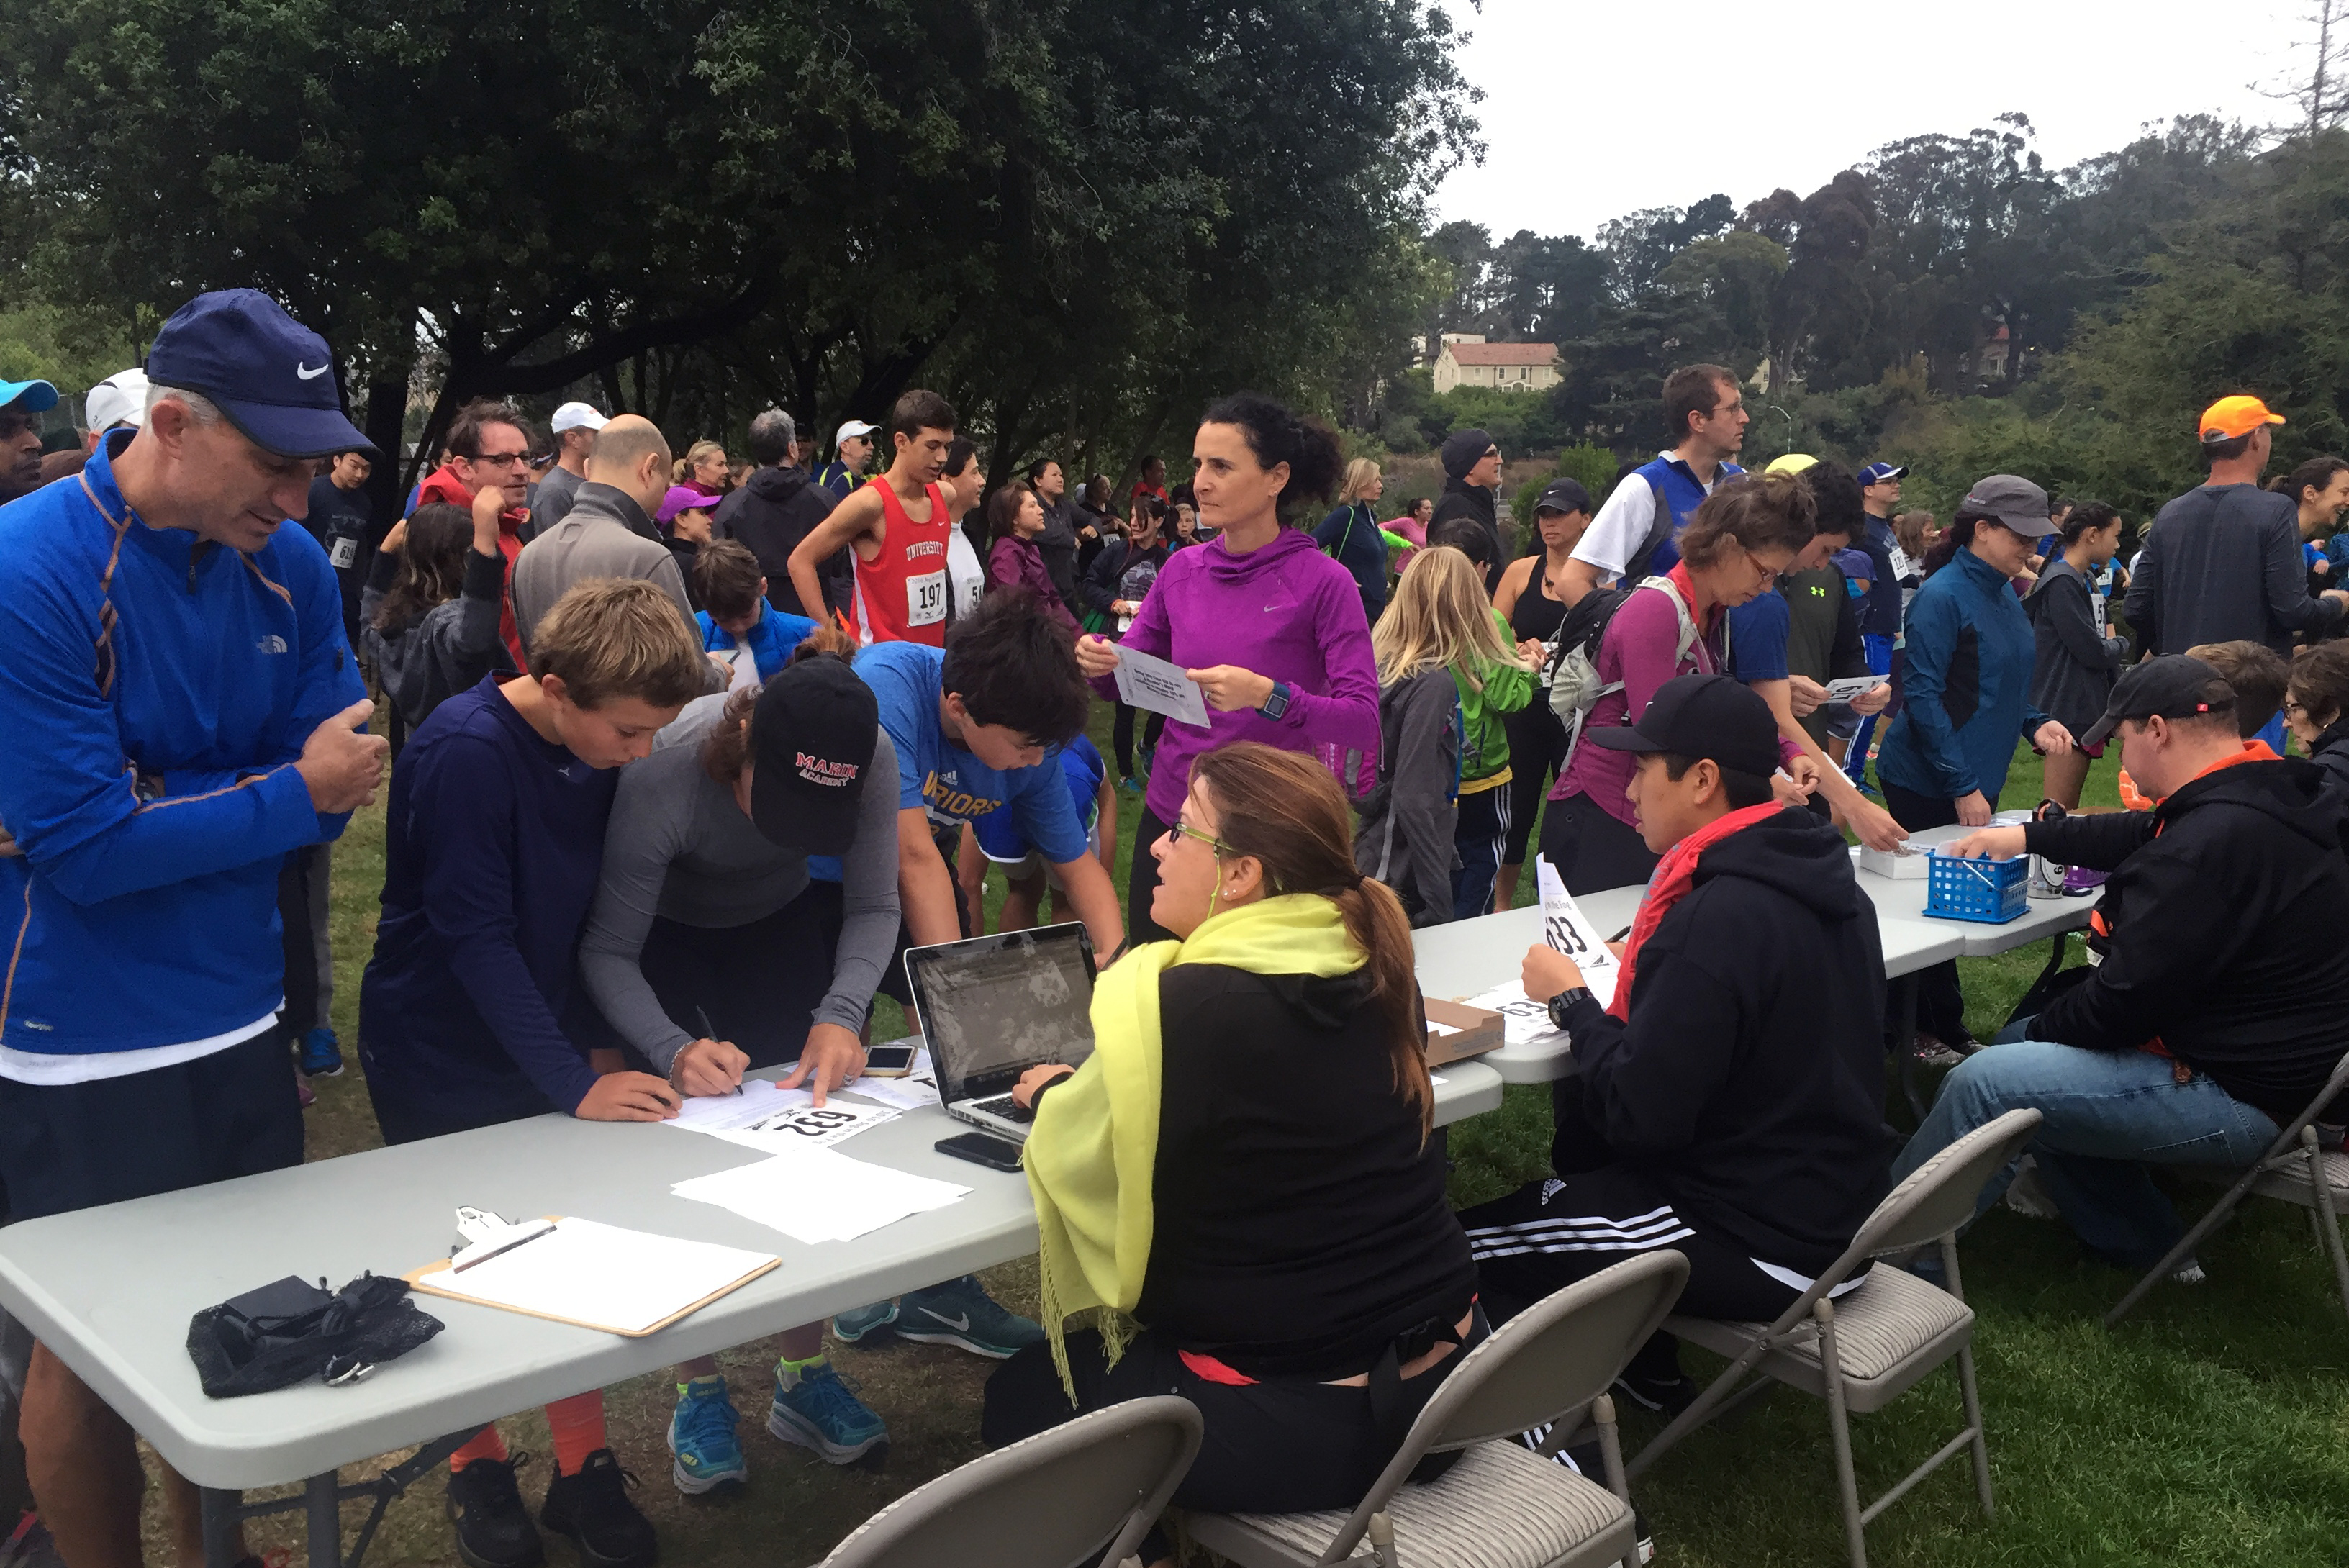 Signing up runners on race morning in Mountain Lake Park